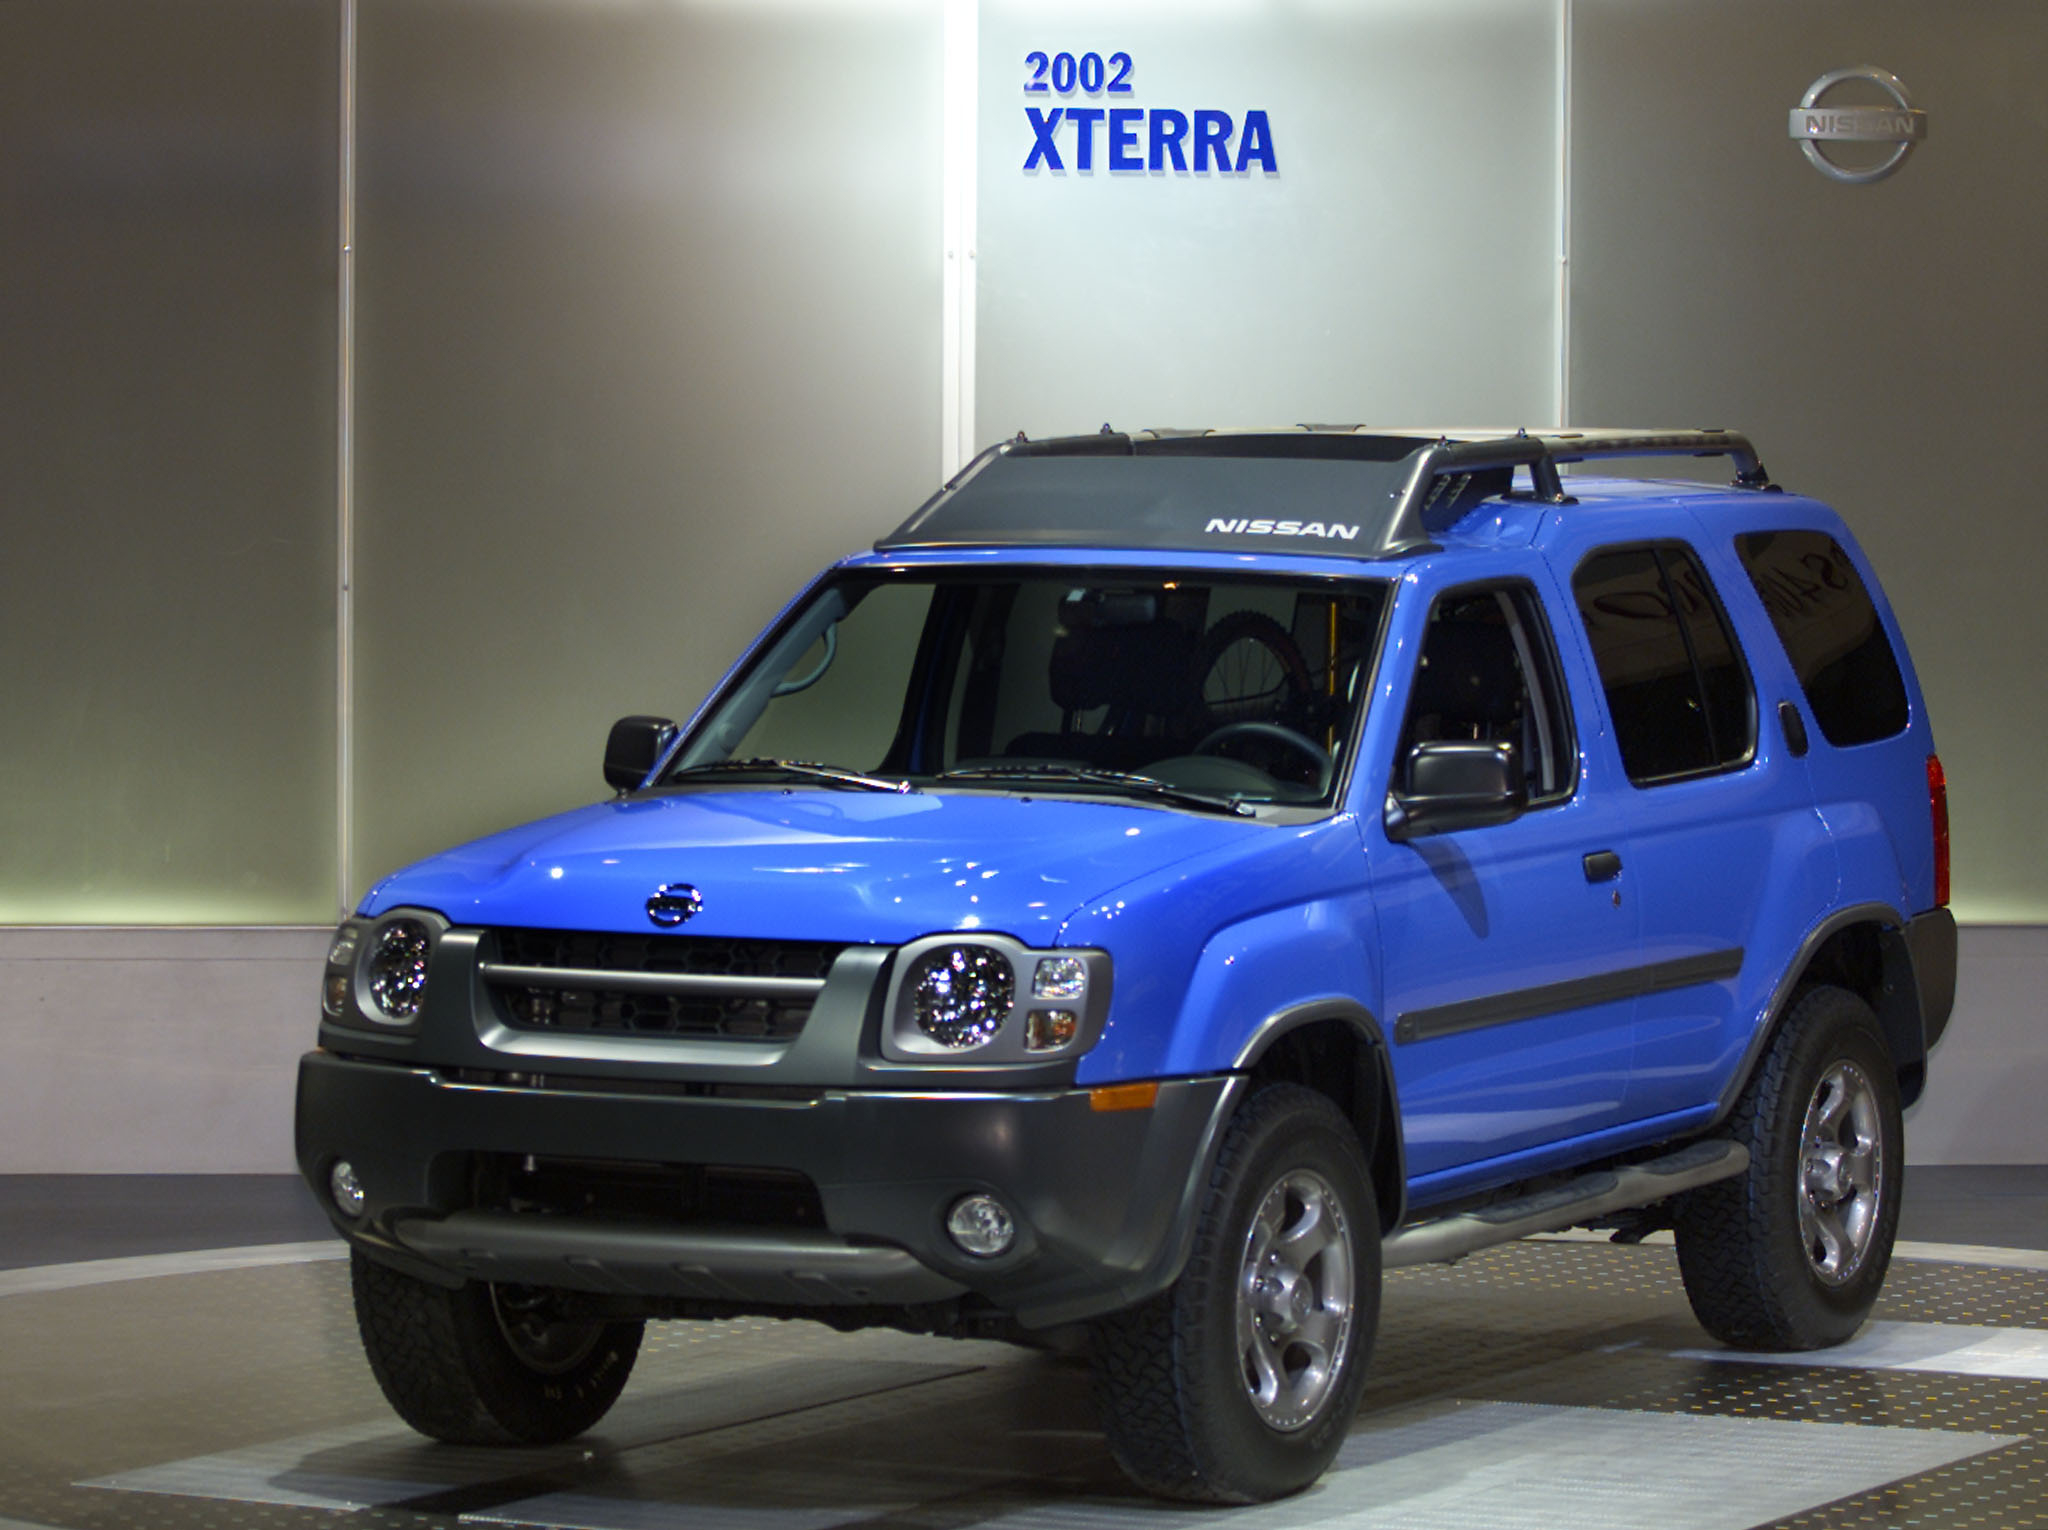 The 2002 Nissan Xterra debuts at the 100th Chicago Auto Show, in Chicago, February 7, 2001. The 2002 model features a dramatic restyling of the front end, a supercharged V6 engine option and a revised interior with a new istrument panel.